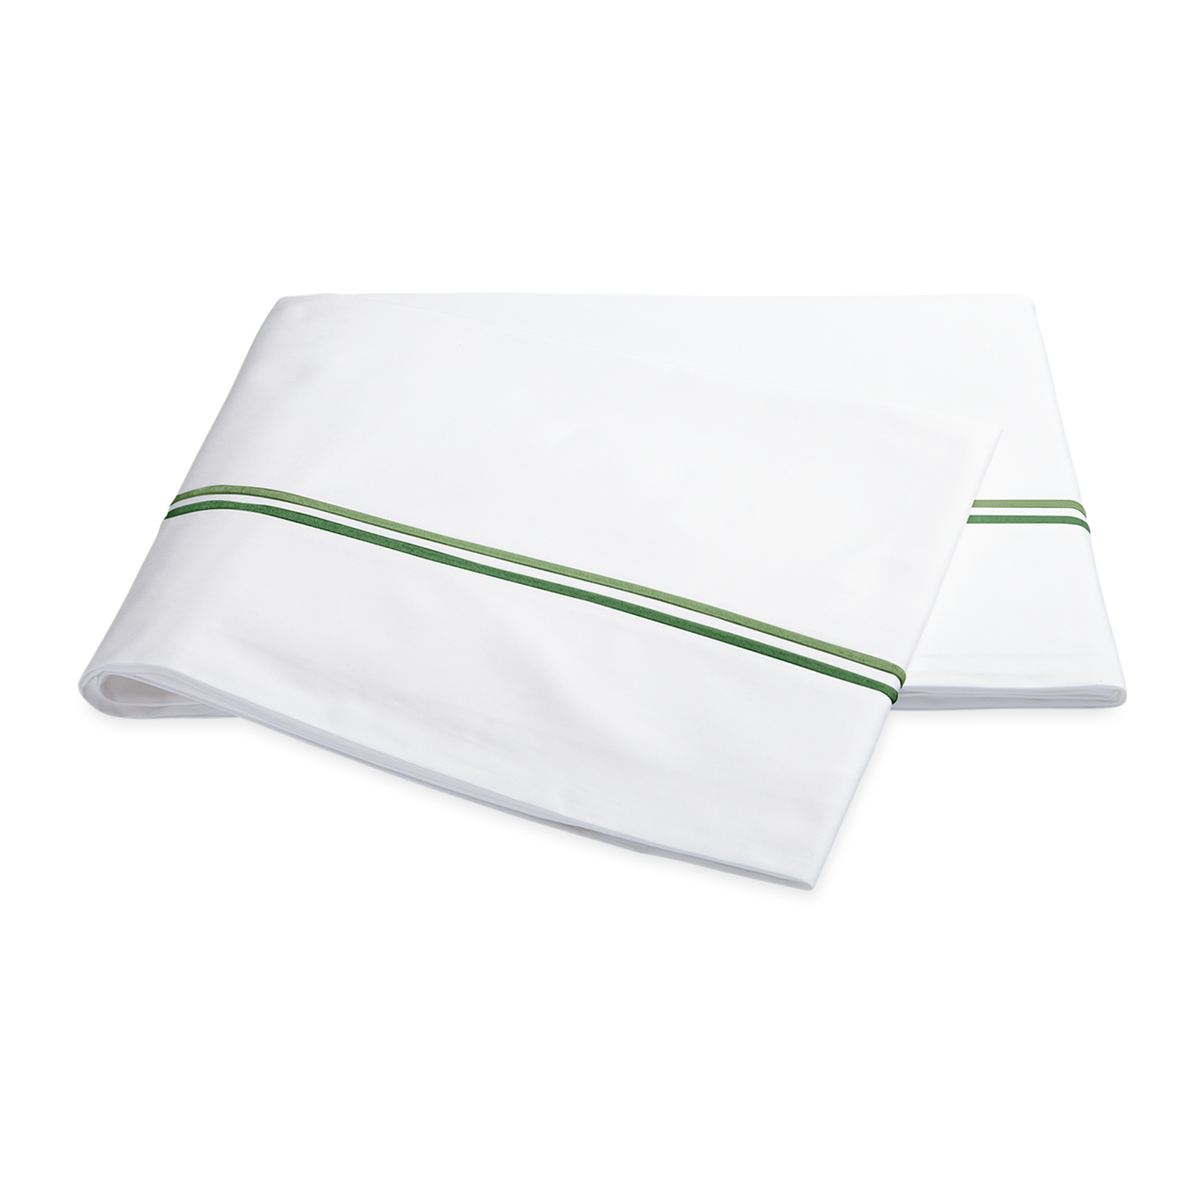 Flat Sheet of Matouk Essex Bedding Collection in Green Color